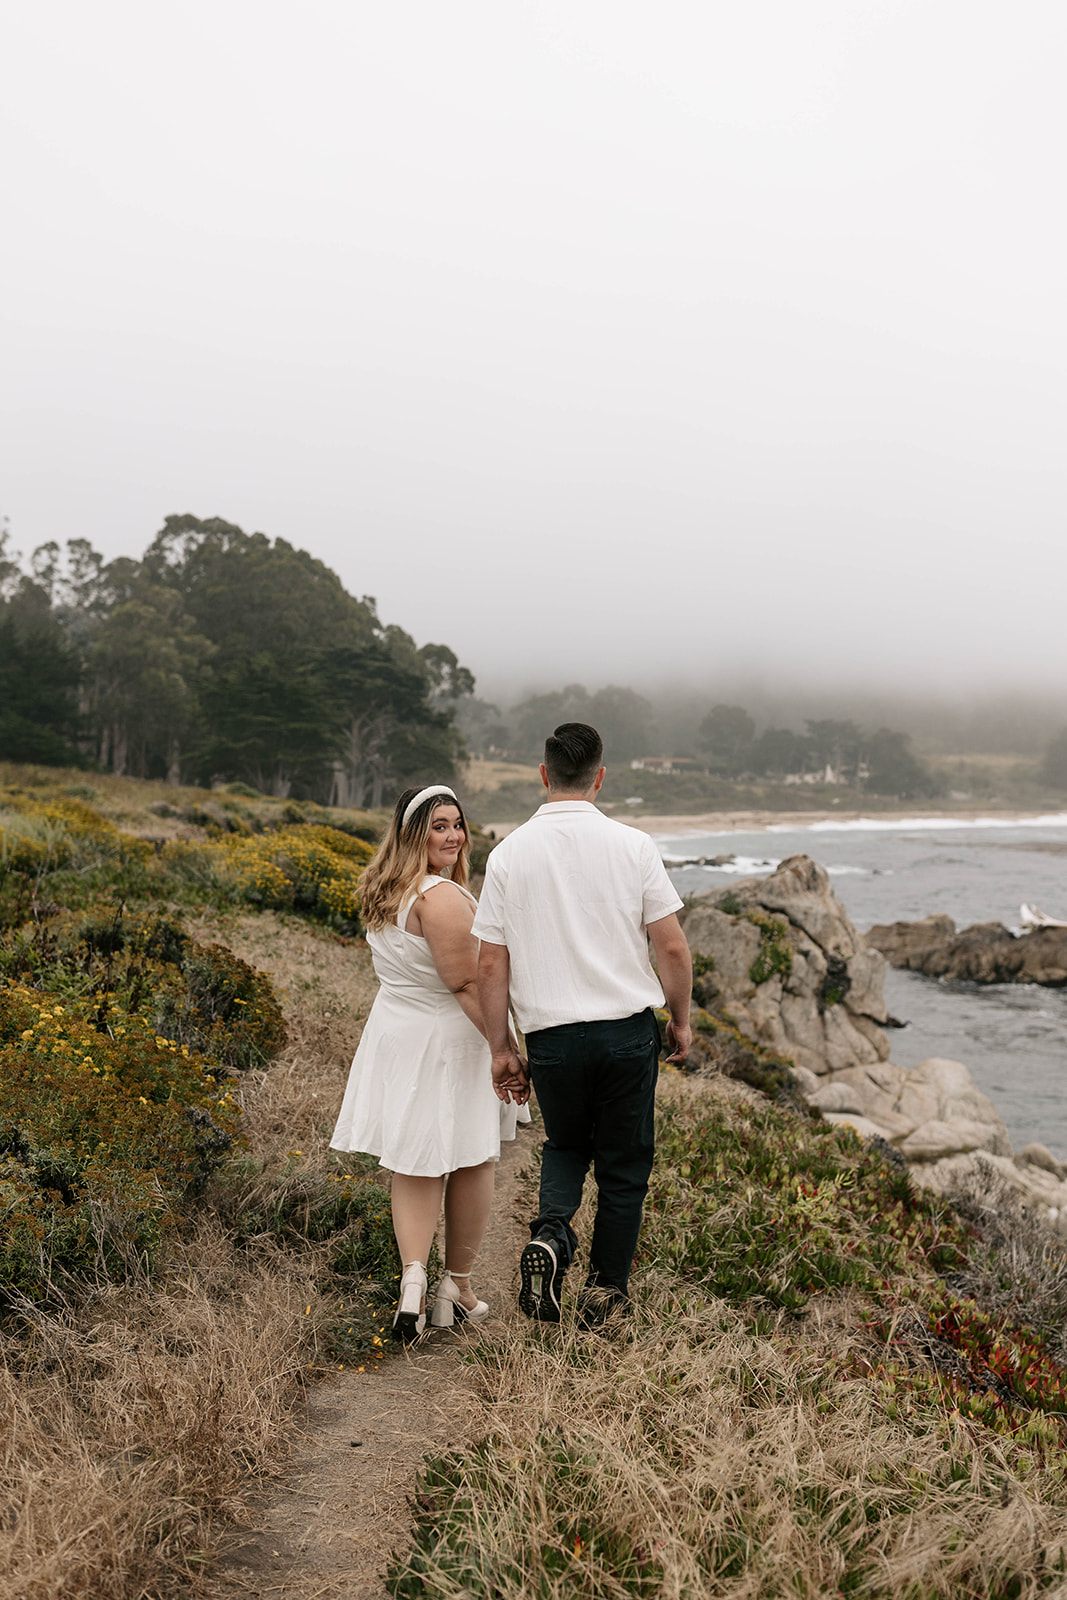 carmel by the sea carmel beach california engagement with dog surprise engagement photoshoot photography ideas cute 